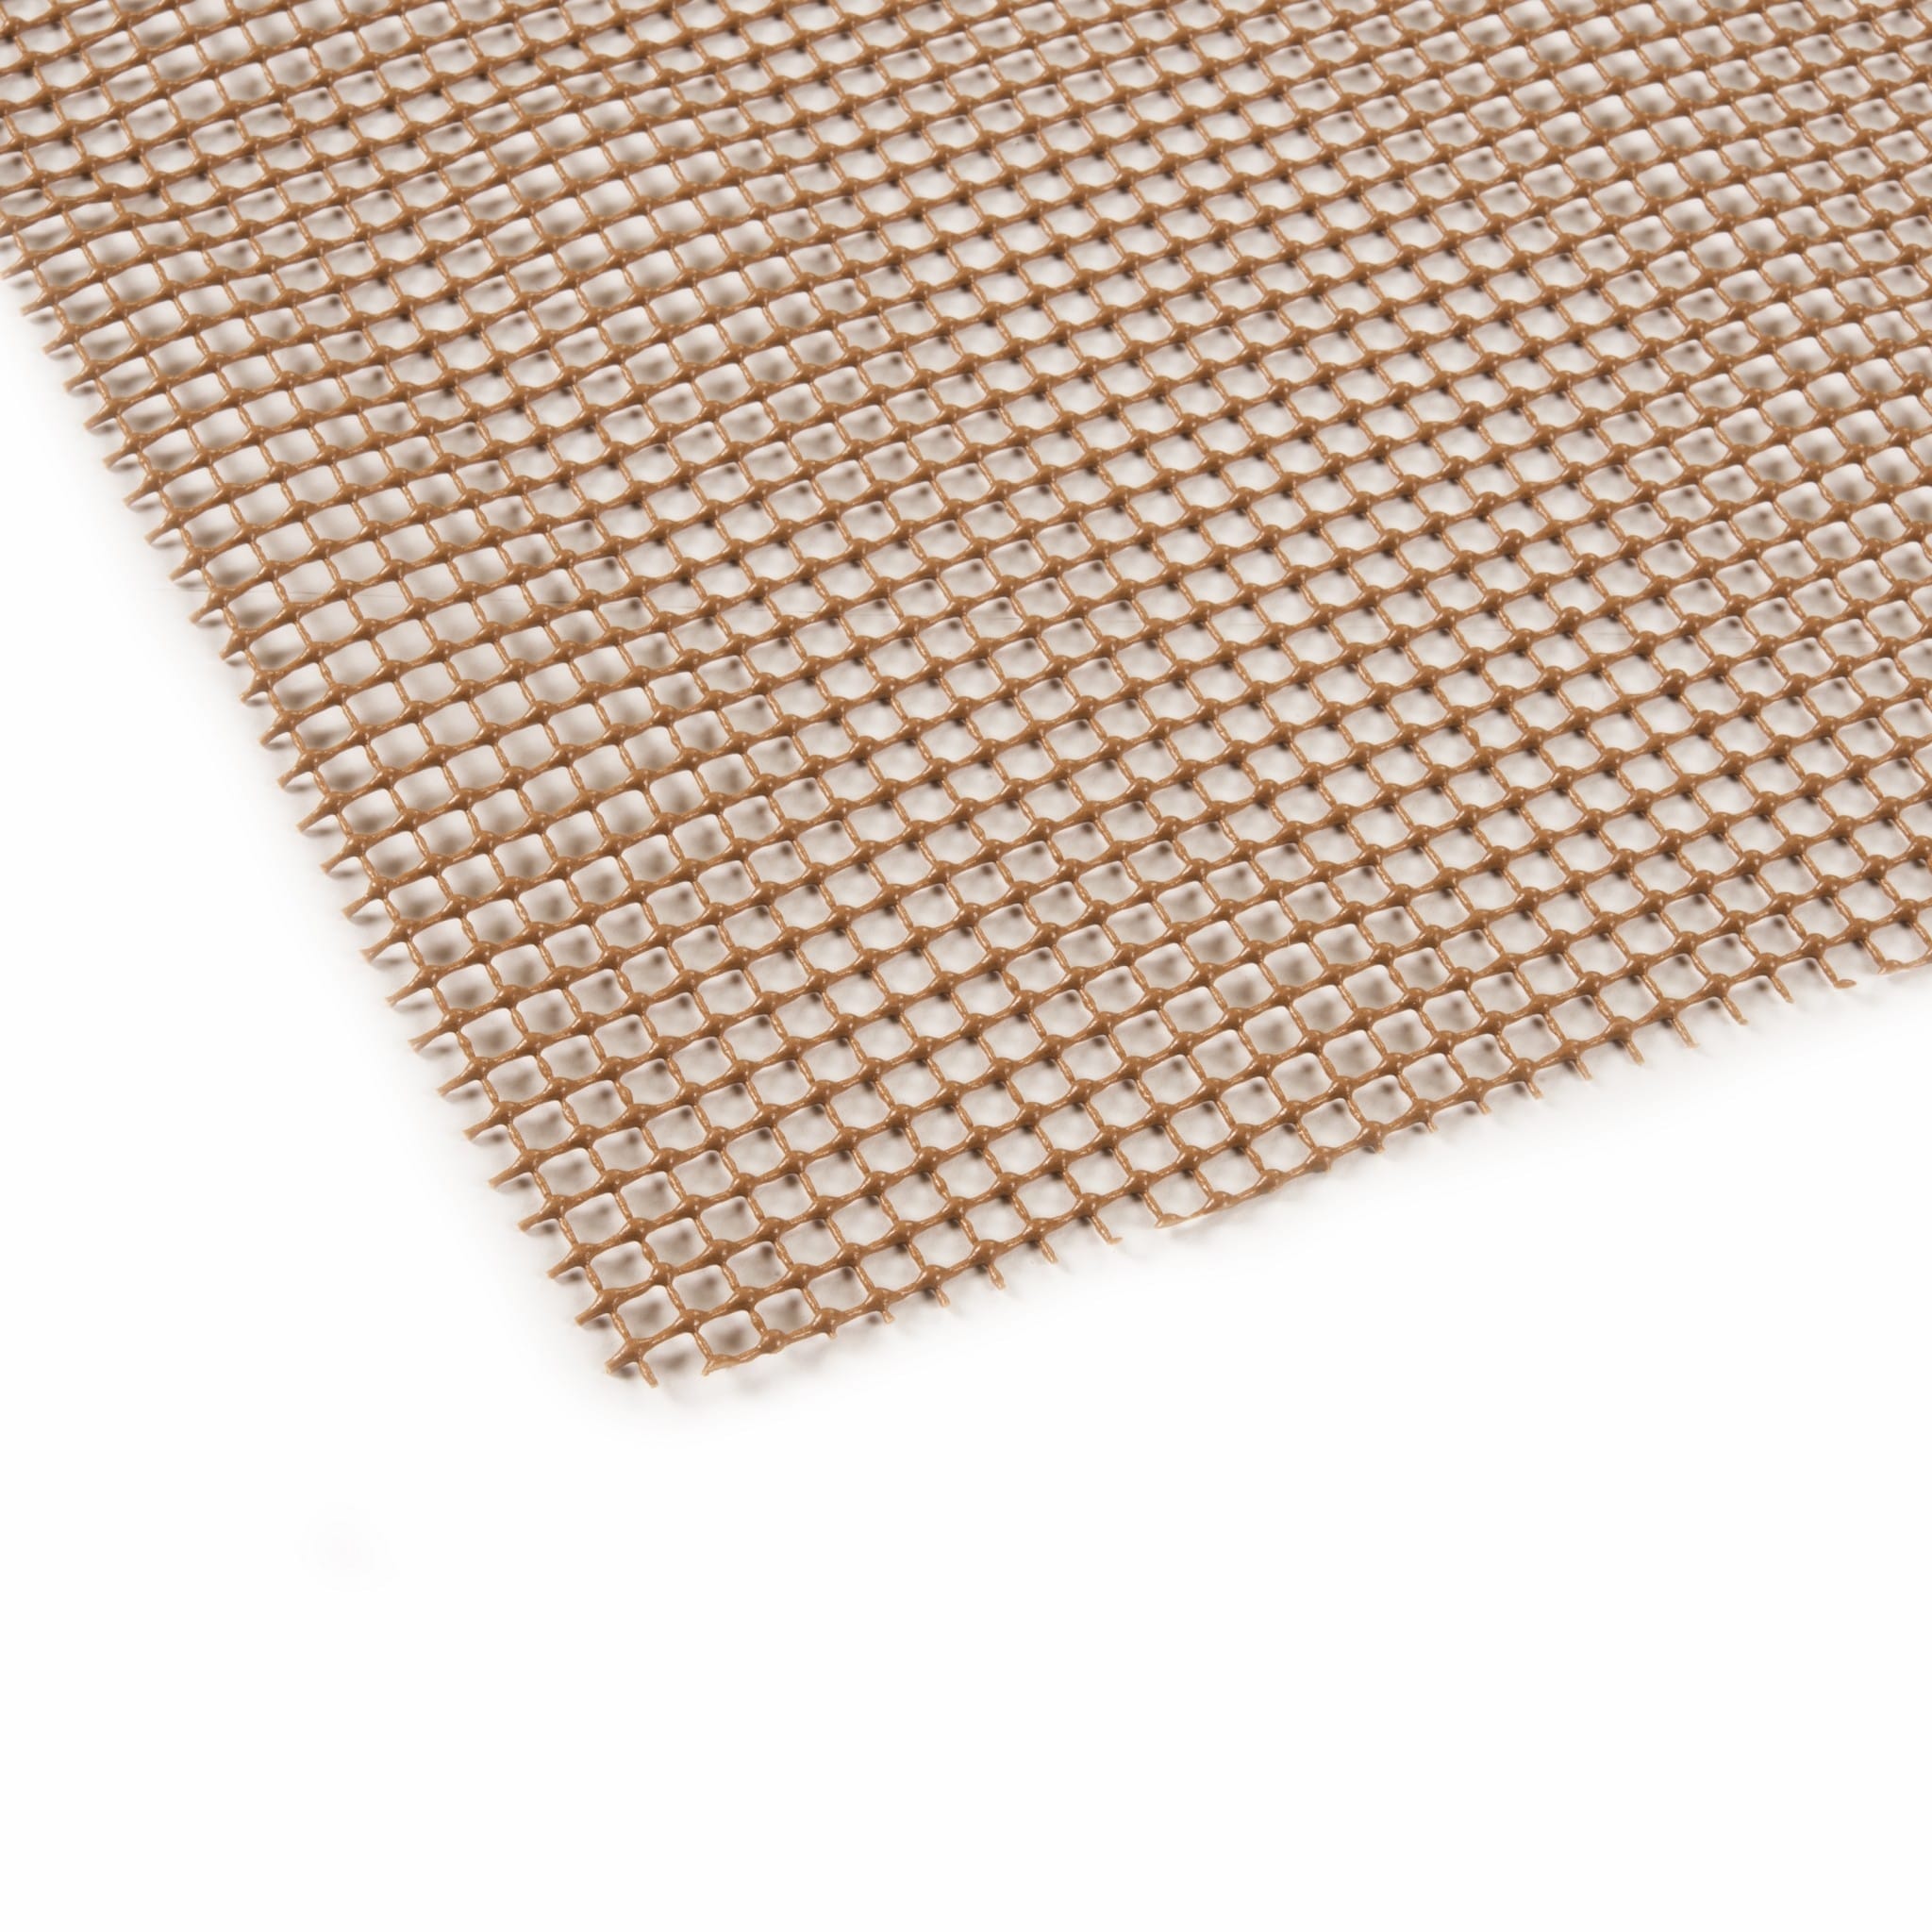 https://ak1.ostkcdn.com/images/products/is/images/direct/87c30dc5999429b7e50abb56c422b56a3ab095b6/Brown-Non-Slip-Outdoor-Rug-Pad.jpg